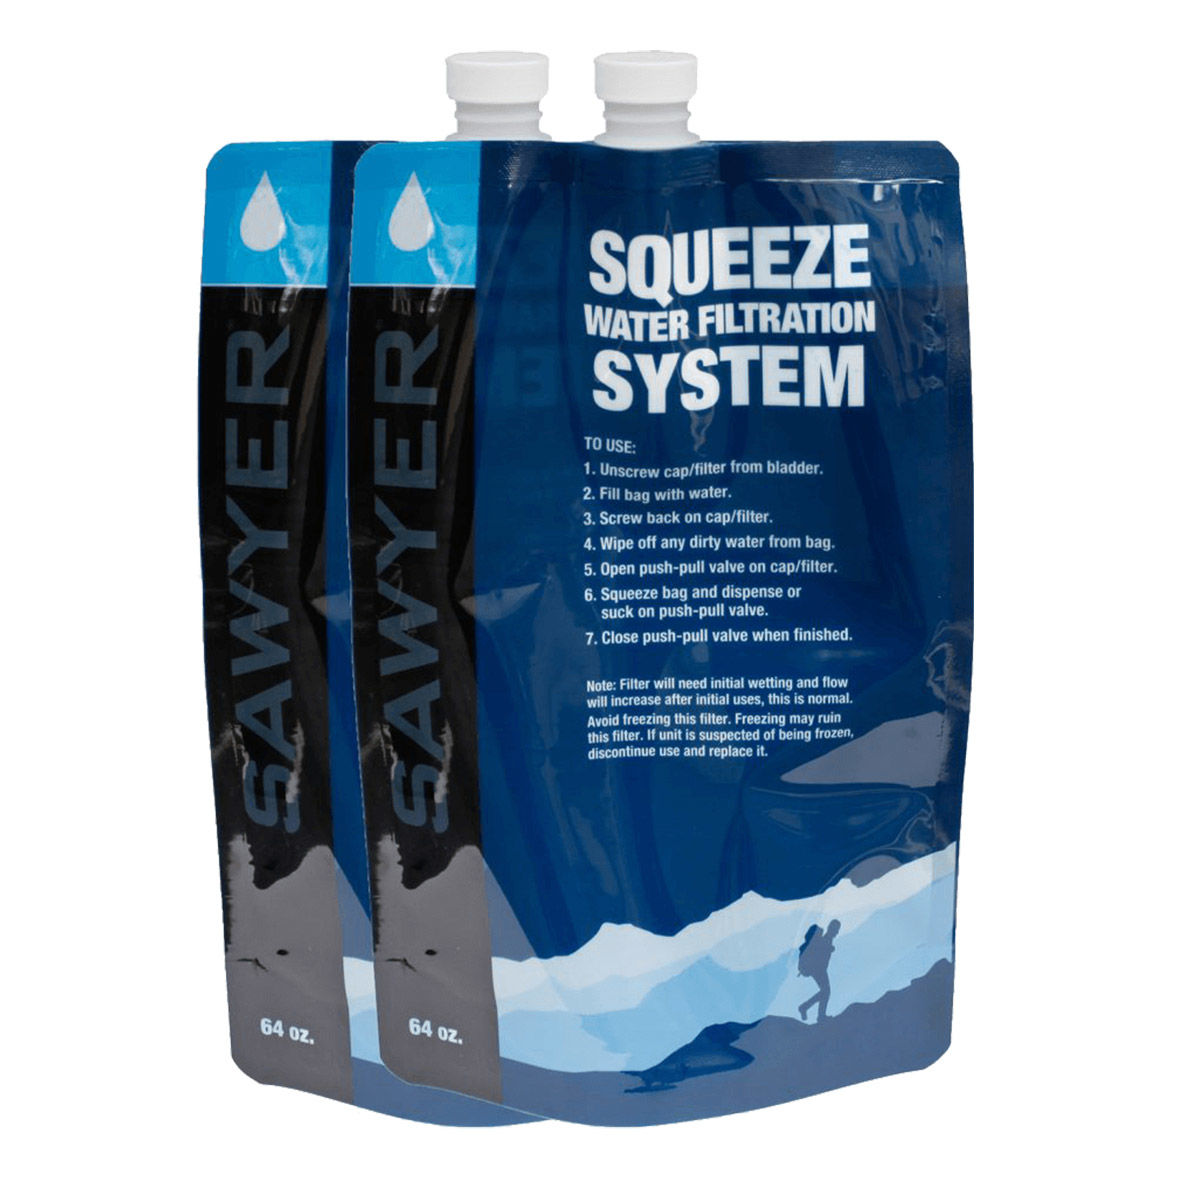 Sawyer 2L-squeezable pouch - Set of 2